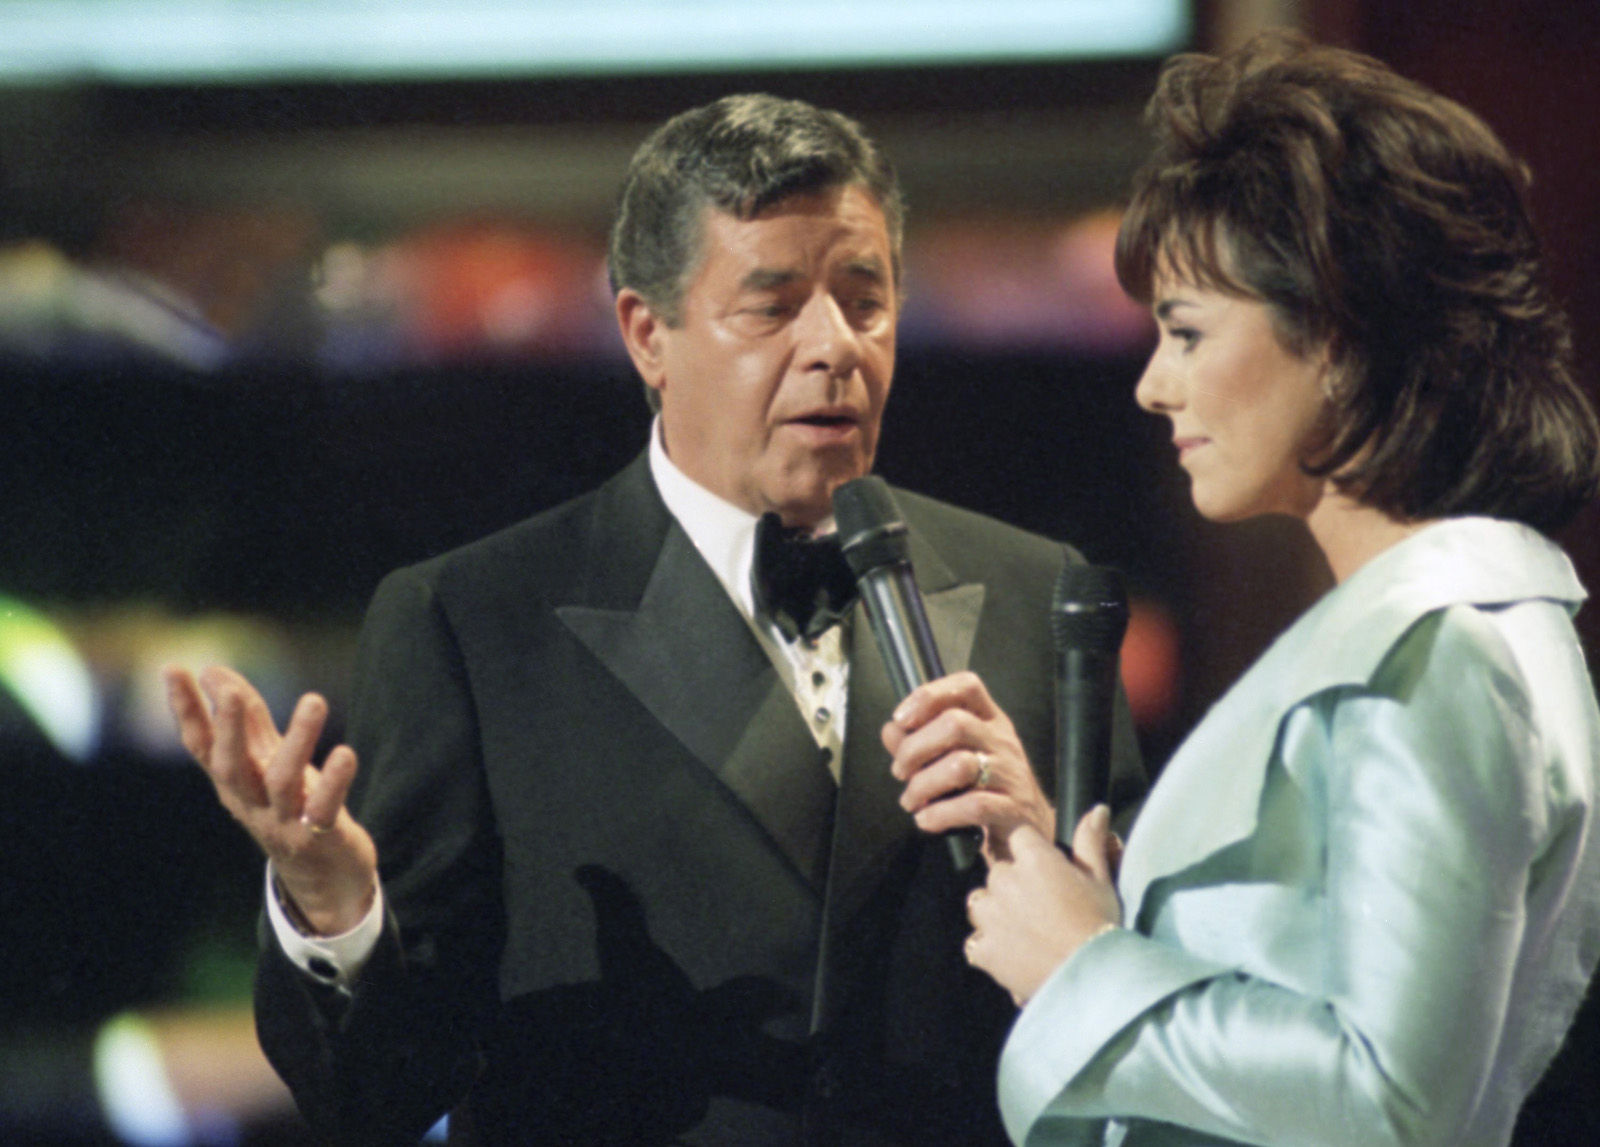 Jerry Lewis, left, is joined by Kathleen Sullivan as a co-host of the Jerry Lewis Stars Across America, MDA Labor Day Telethon, Sunday, Sept. 3, 1995, Los Angeles, Calif. Lewis hopes the more than 21 hour telecast will exceed the 1994 pledge of $47.1 million. (AP Photo/Michael Tweed)